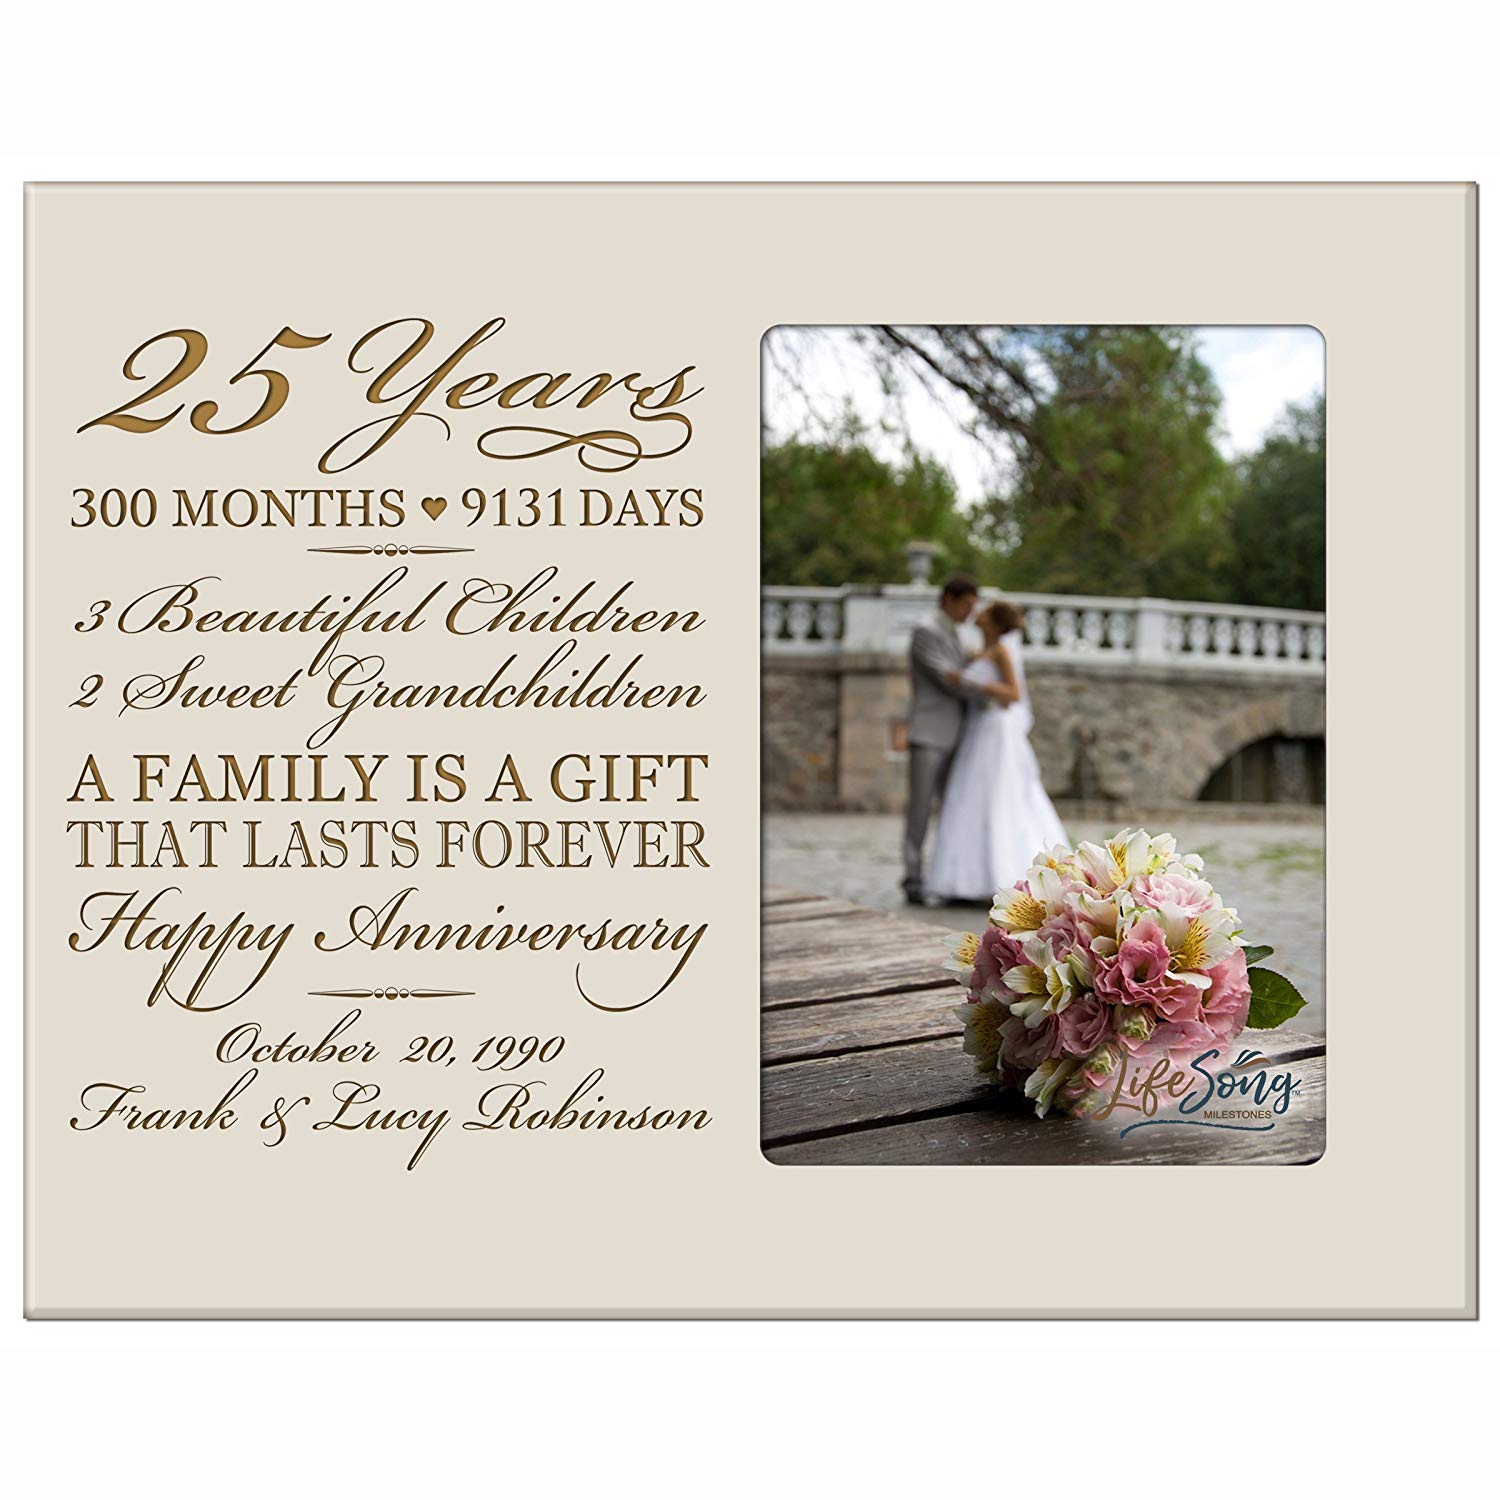 Lifesong Milestones Personalized Unique 25th Wedding Anniversary Picture Frame for Couples